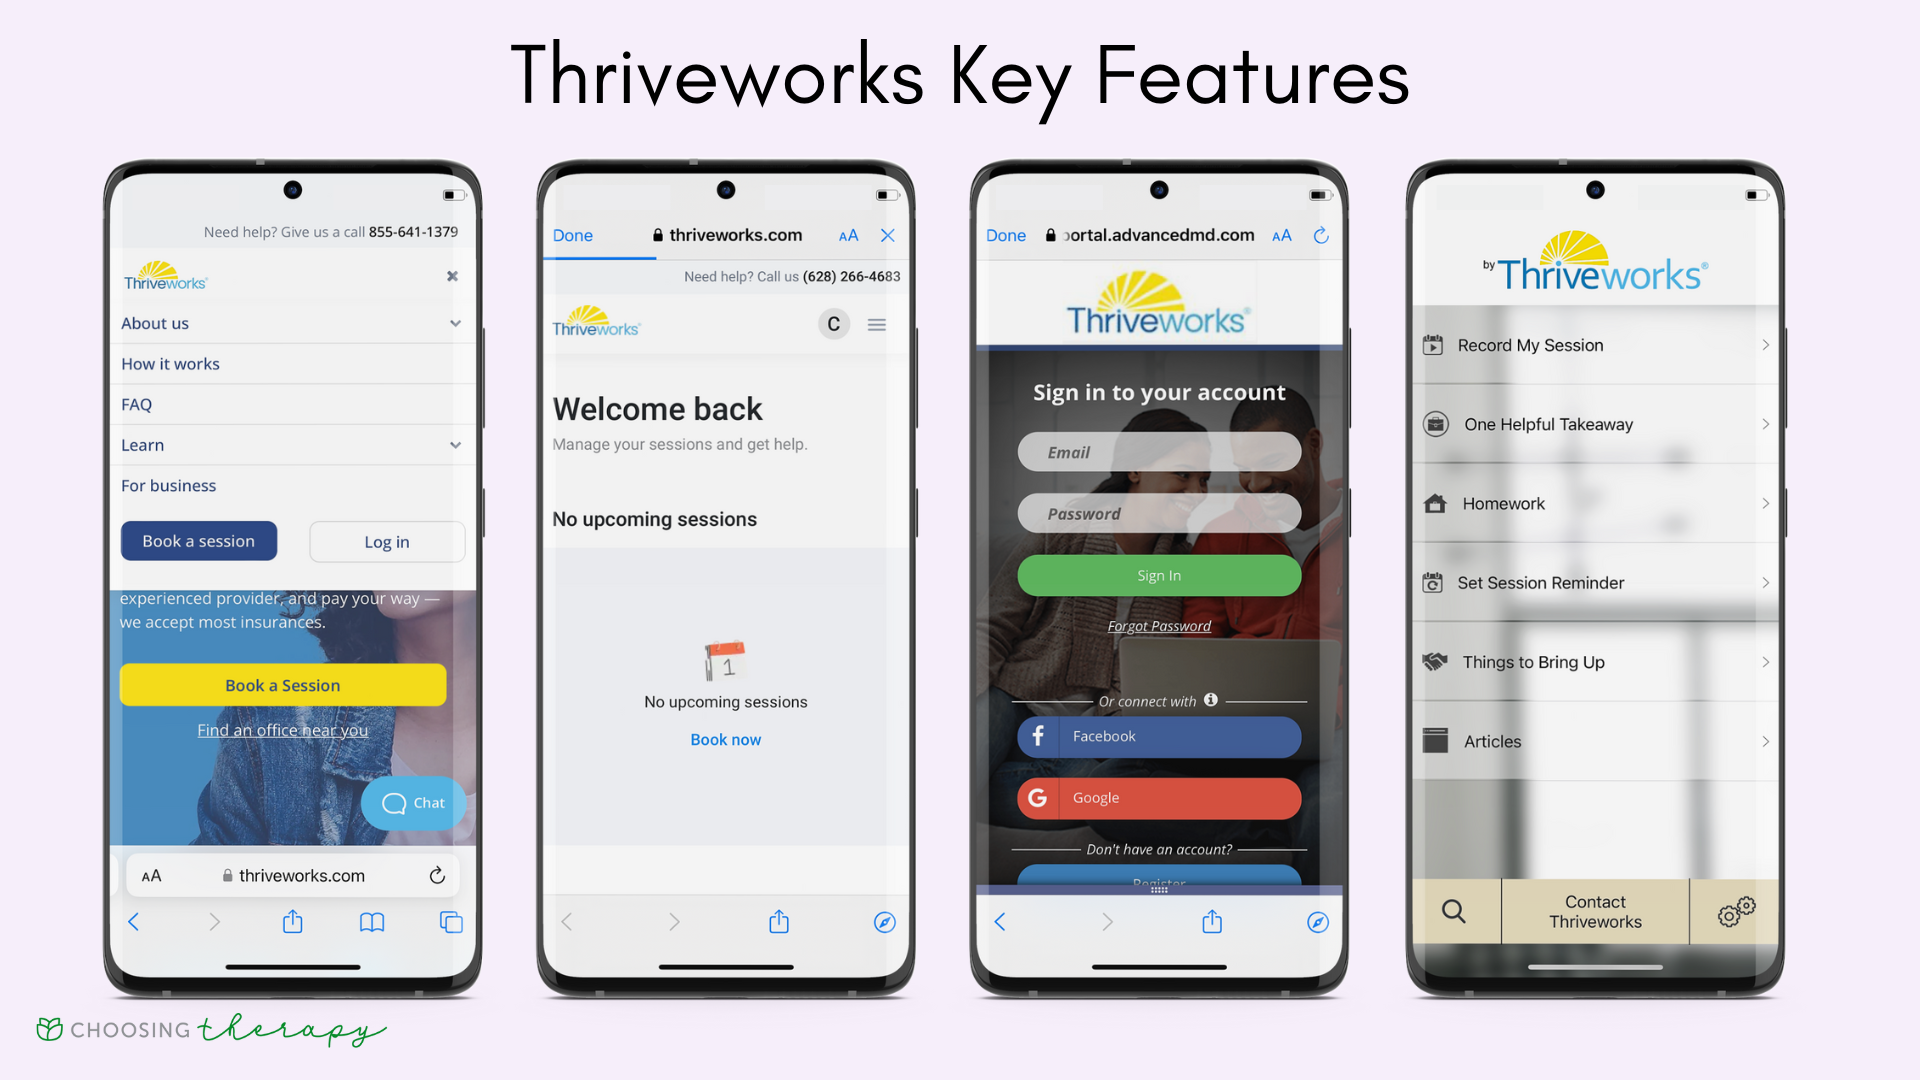 Thriveworks Review 2022 - Image of the key features of how Thriveworks works